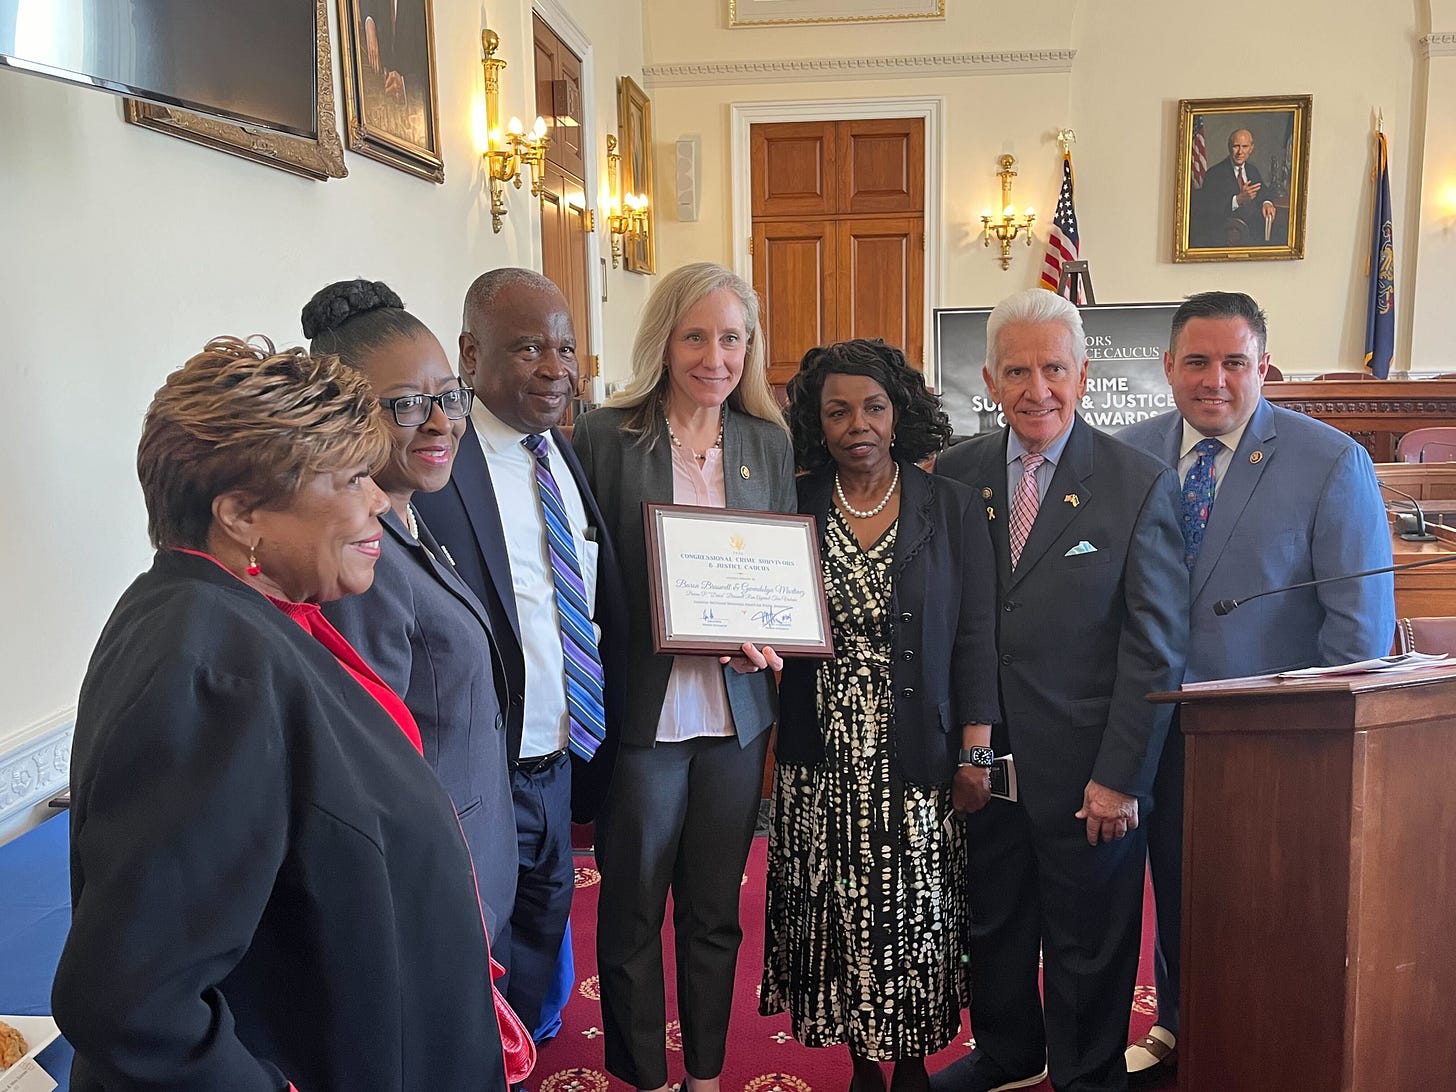 Baron Braswell and Gwendolyn Martinez flank Rep. Abigail Spanberger at the U.S. Capitol on Tuesday, April 16. Braswell and Martinez received an award for their work preventing teen violence in Virginia. Photo courtesy Spanberger's office. 